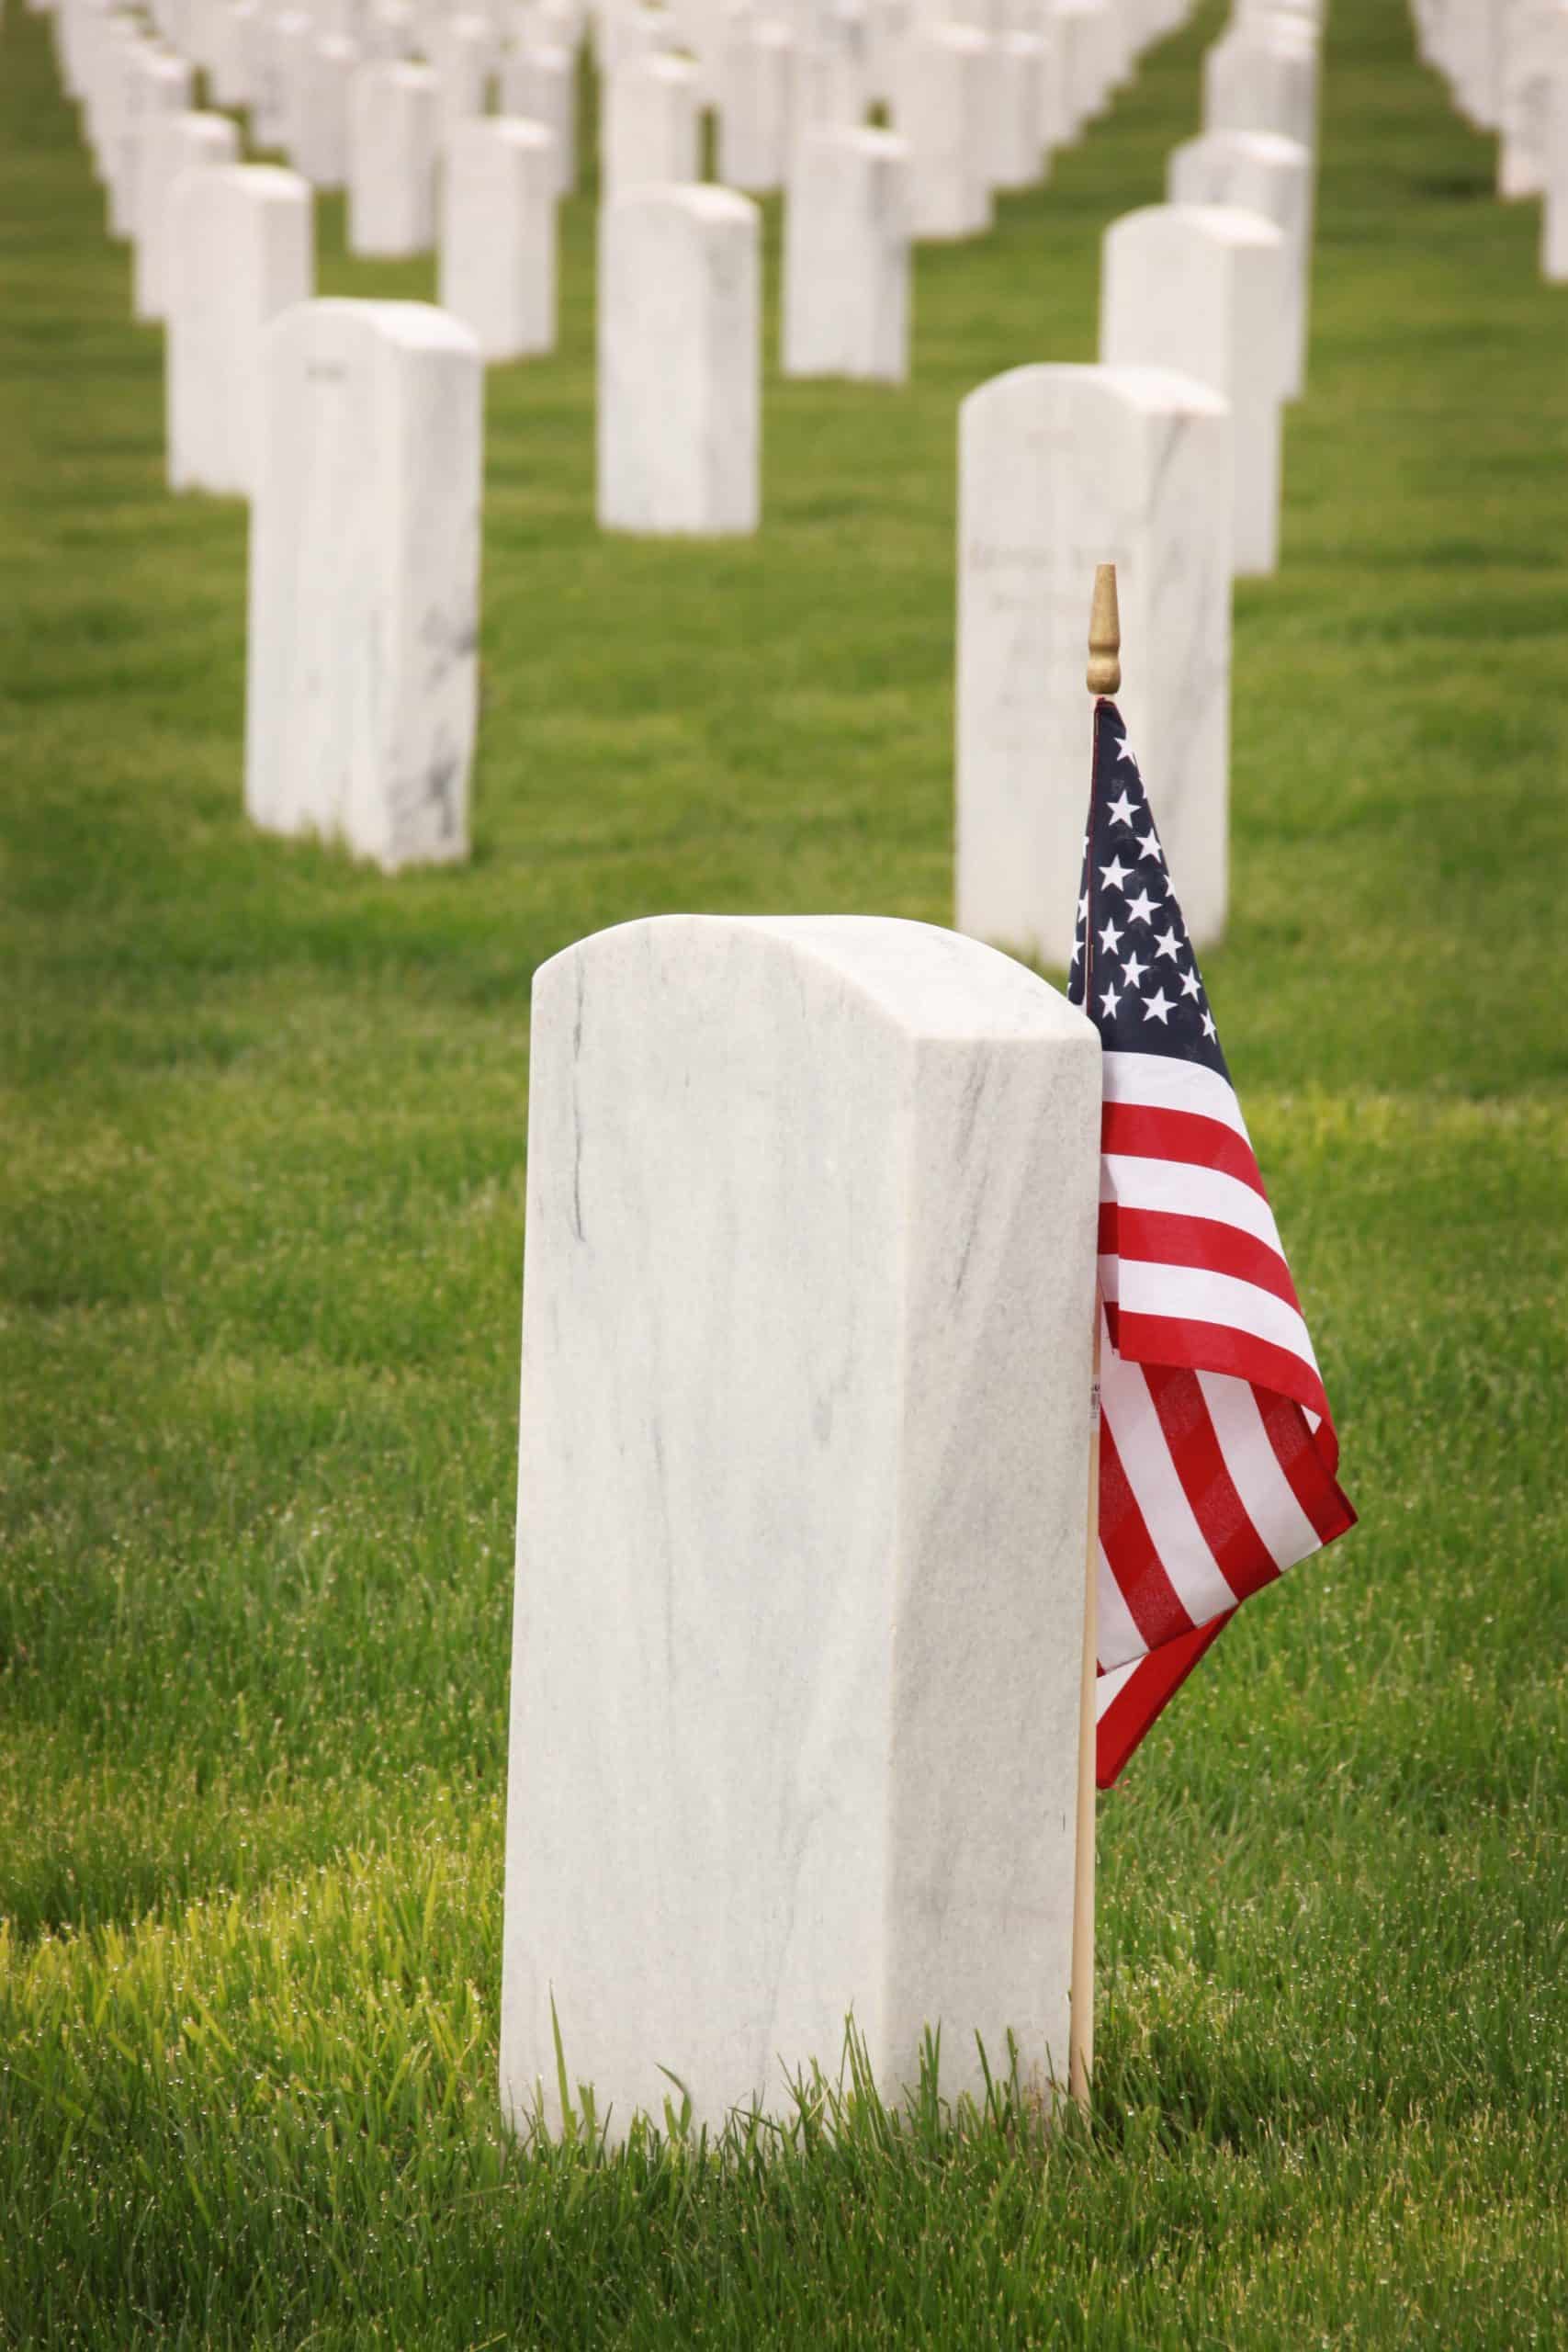 White headstones in a field. One has an American flag of remembrance